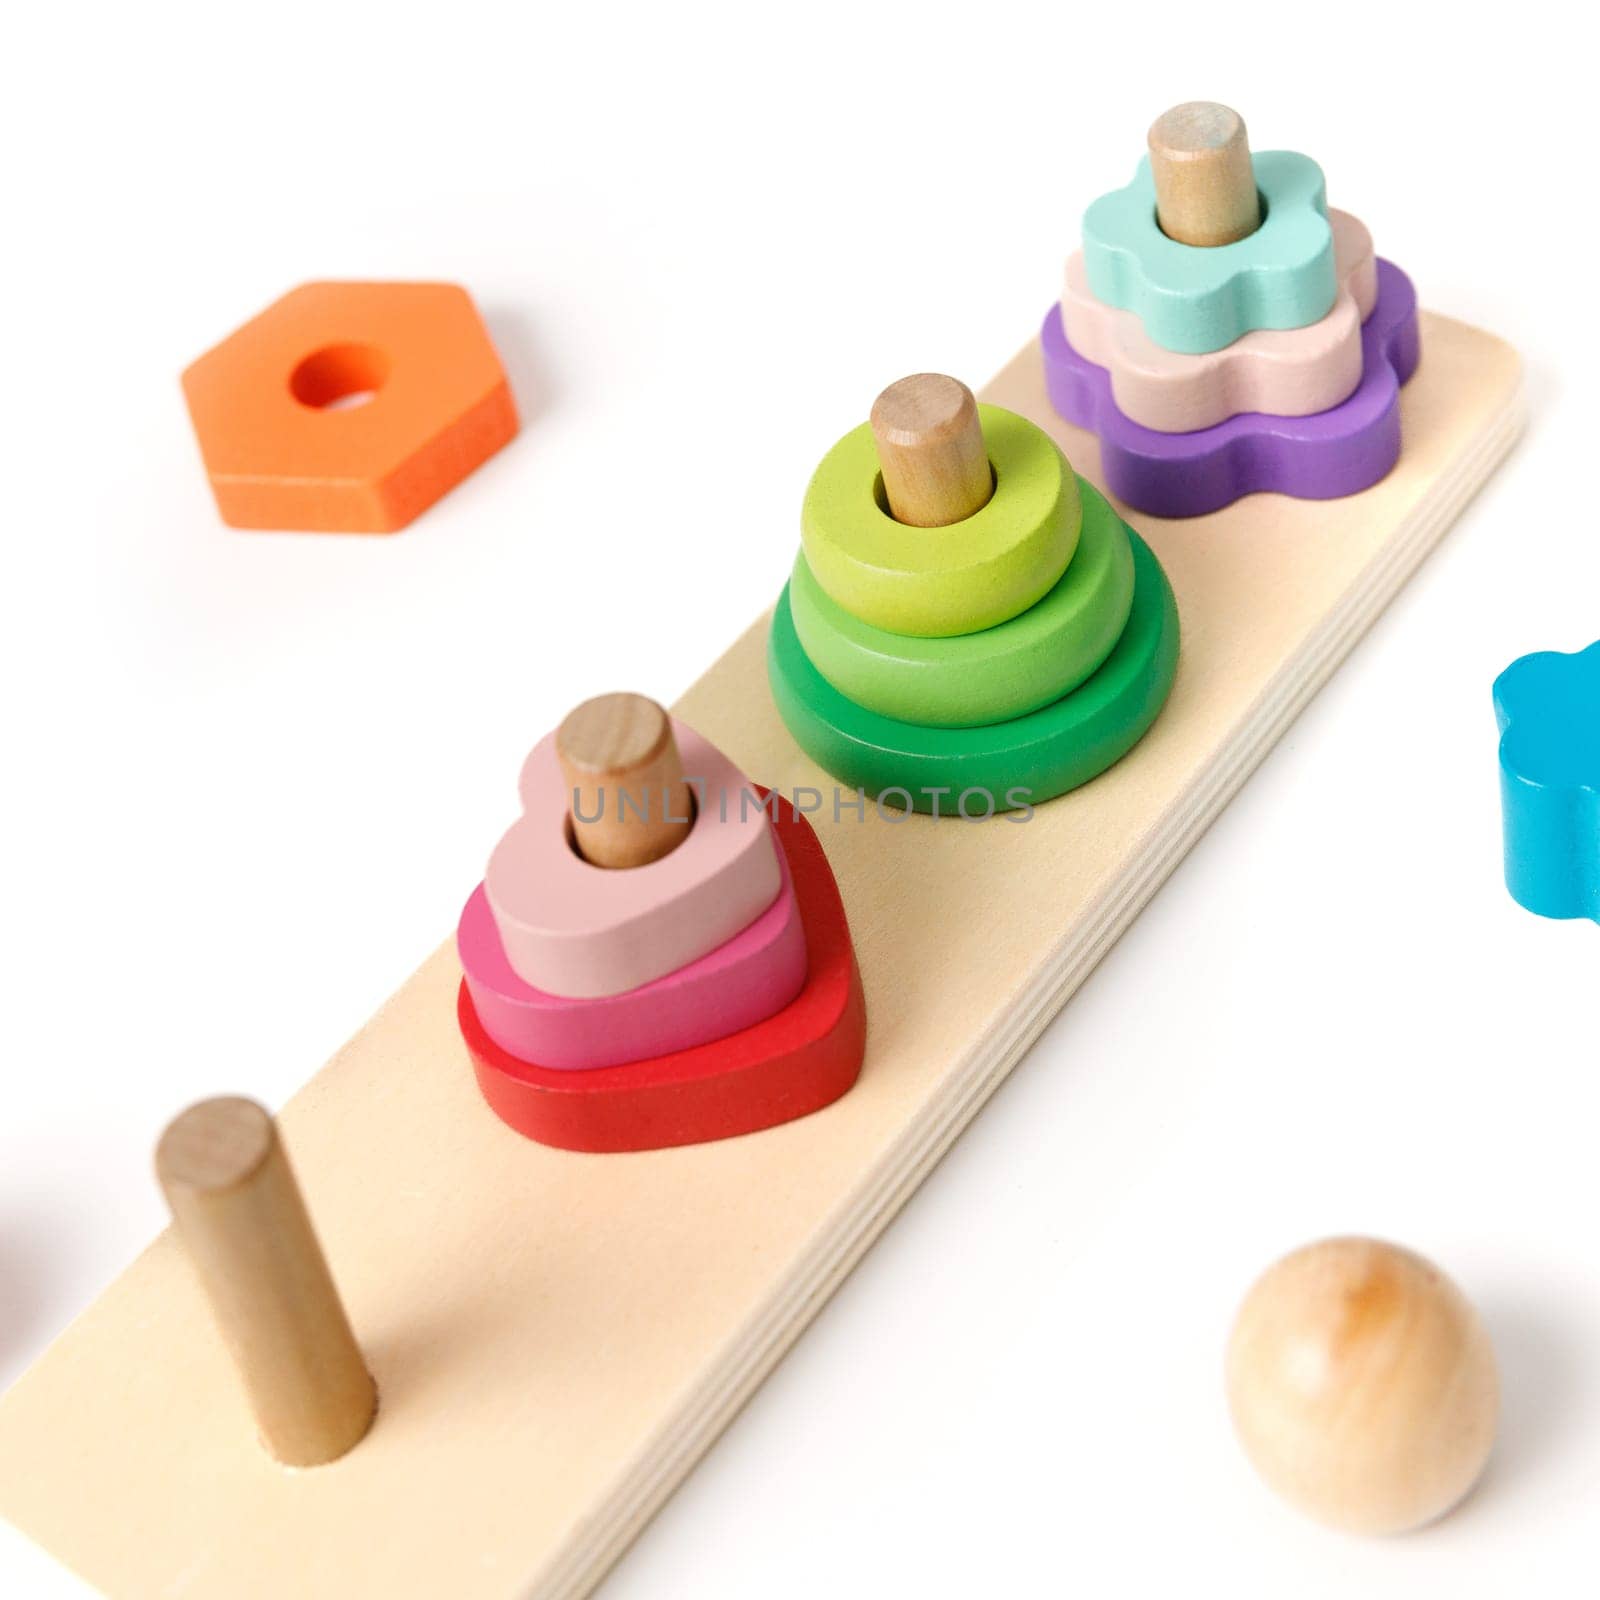 Close-up of Montessori wooden kids's puzzle toy with colorful blocks of different shapes in the shape of 4 pyramids isolated on white background.